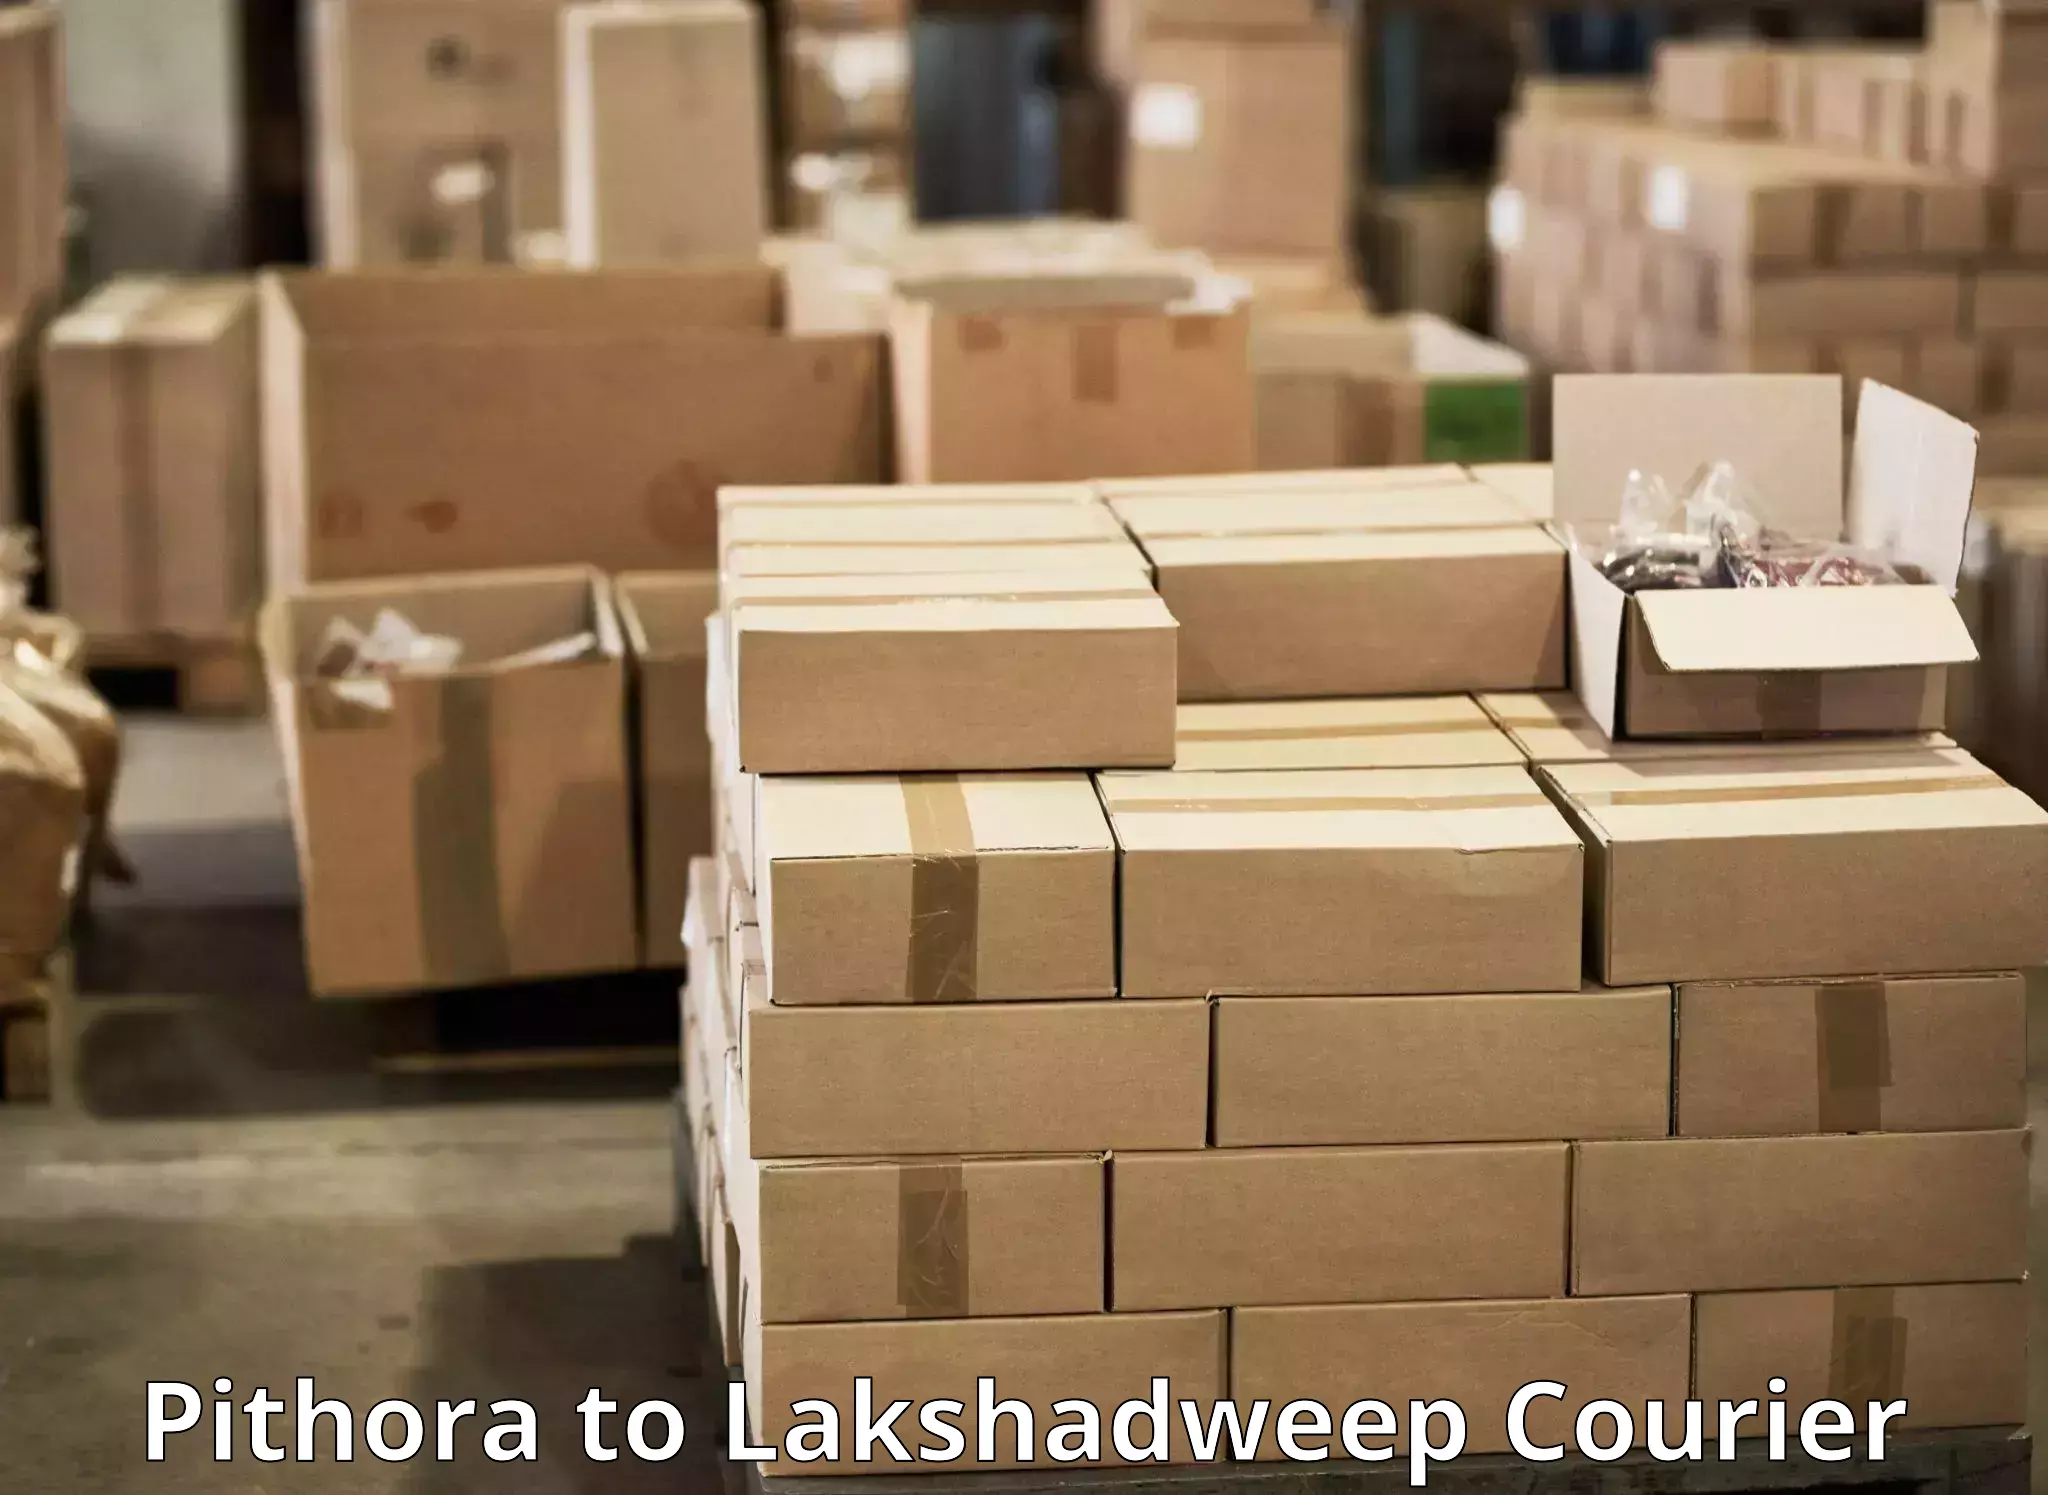 Smart courier technologies Pithora to Lakshadweep